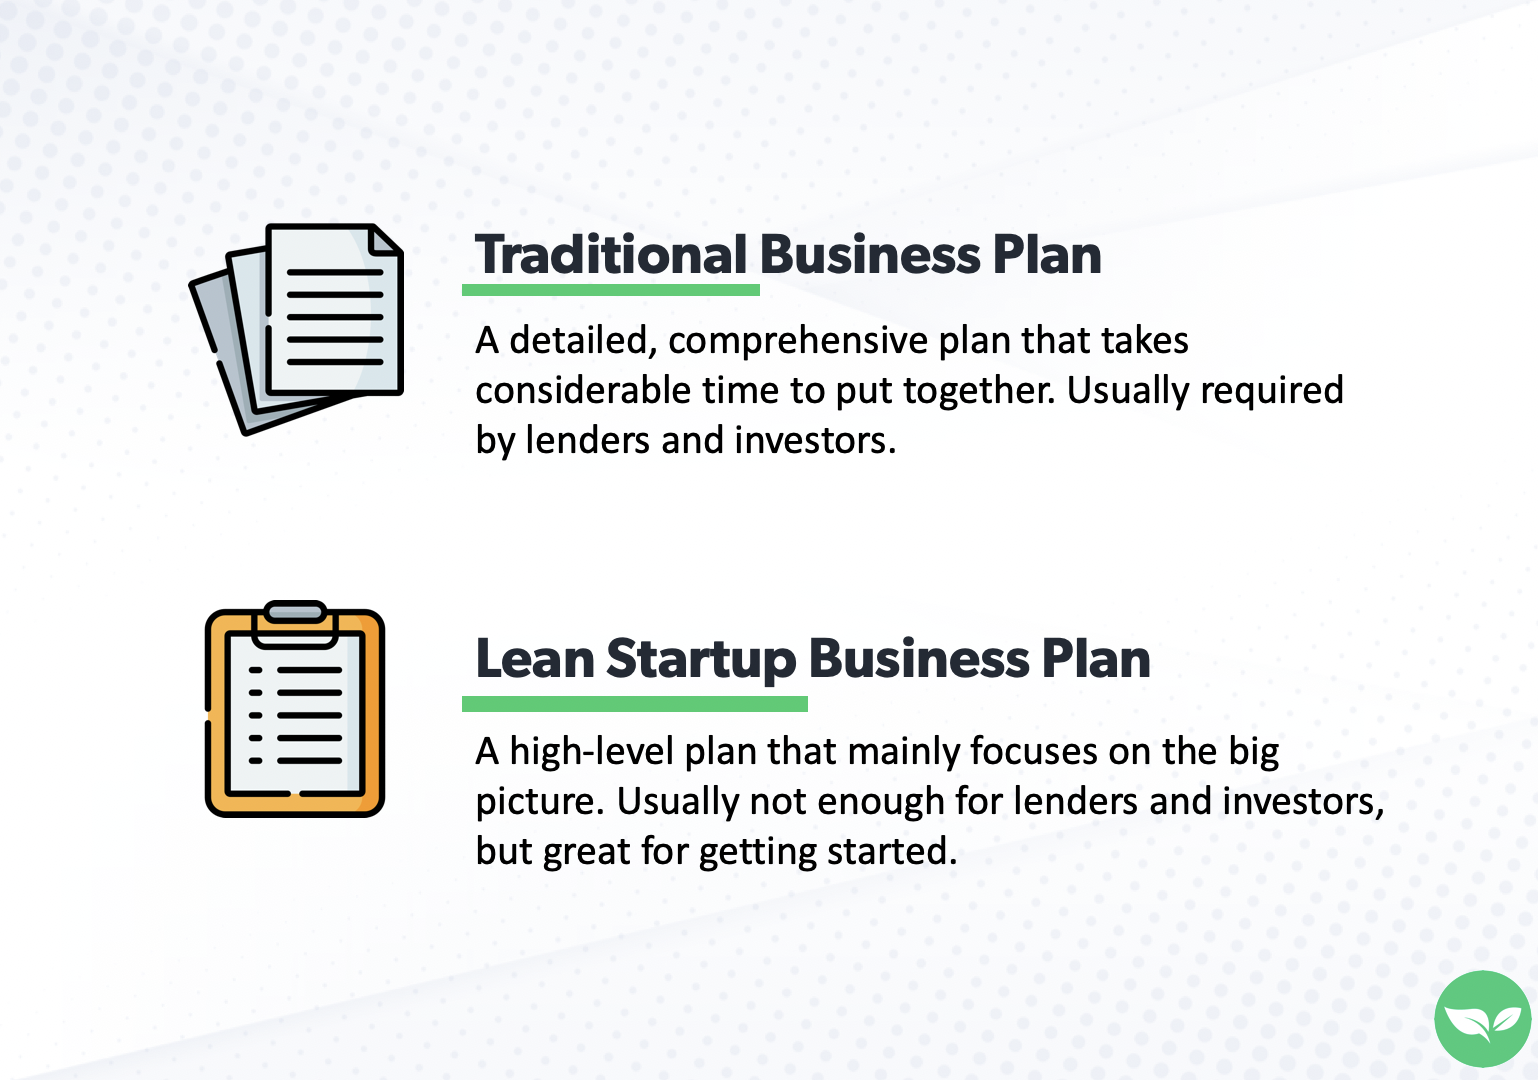 Infographic showing the difference between a traditional business plan and a lean startup business plan.